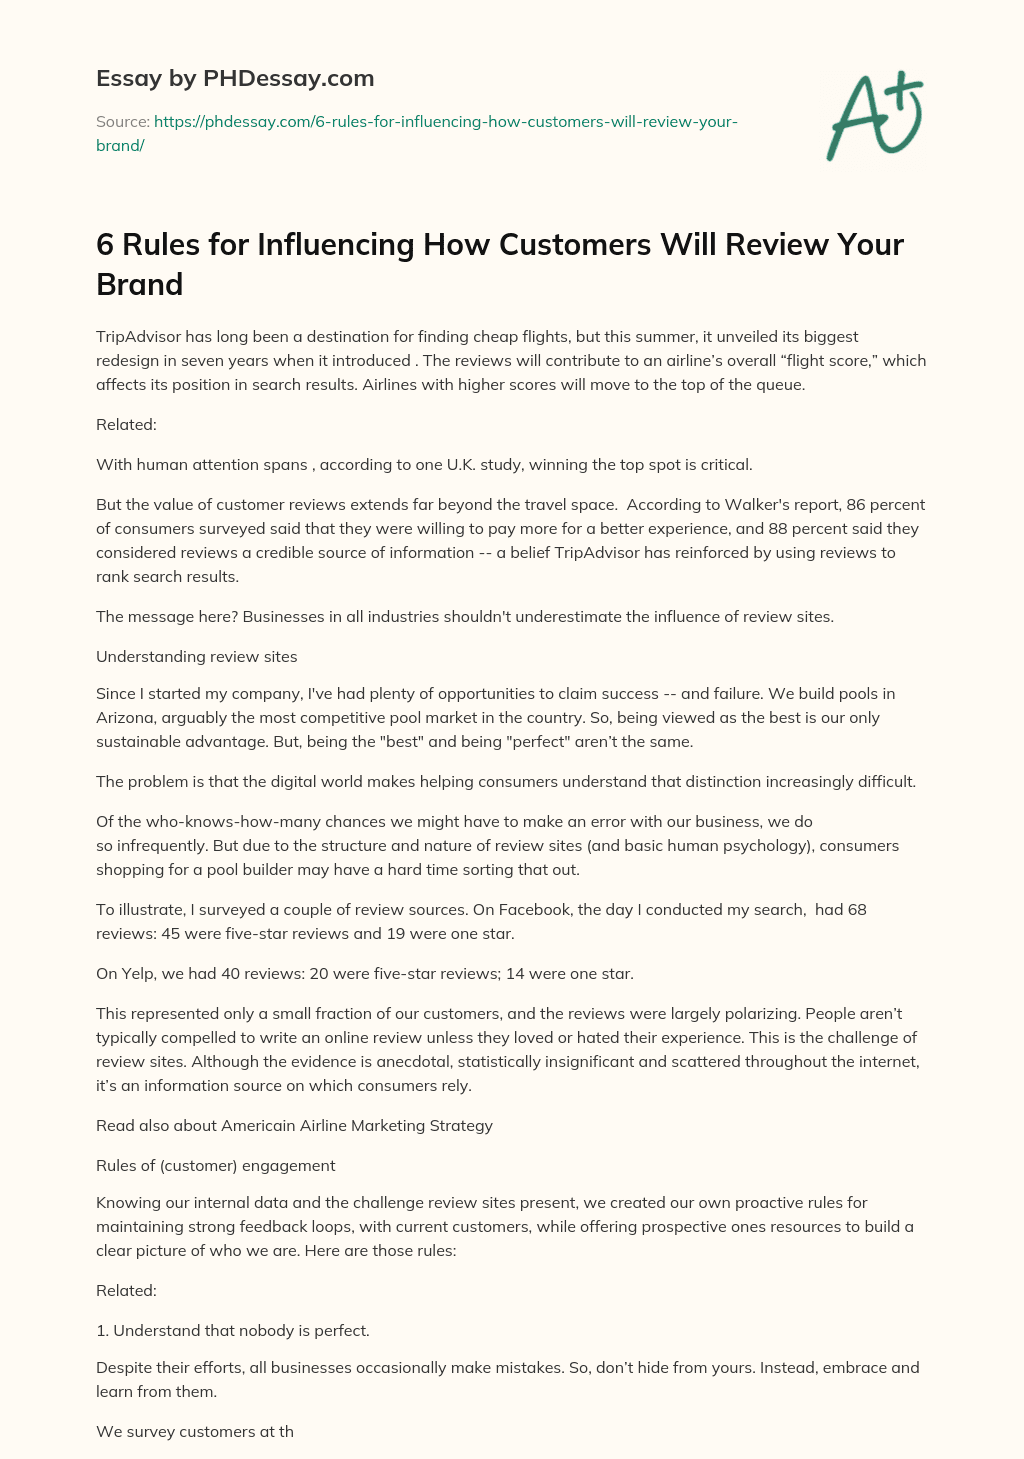 6 Rules for Influencing How Customers Will Review Your Brand essay